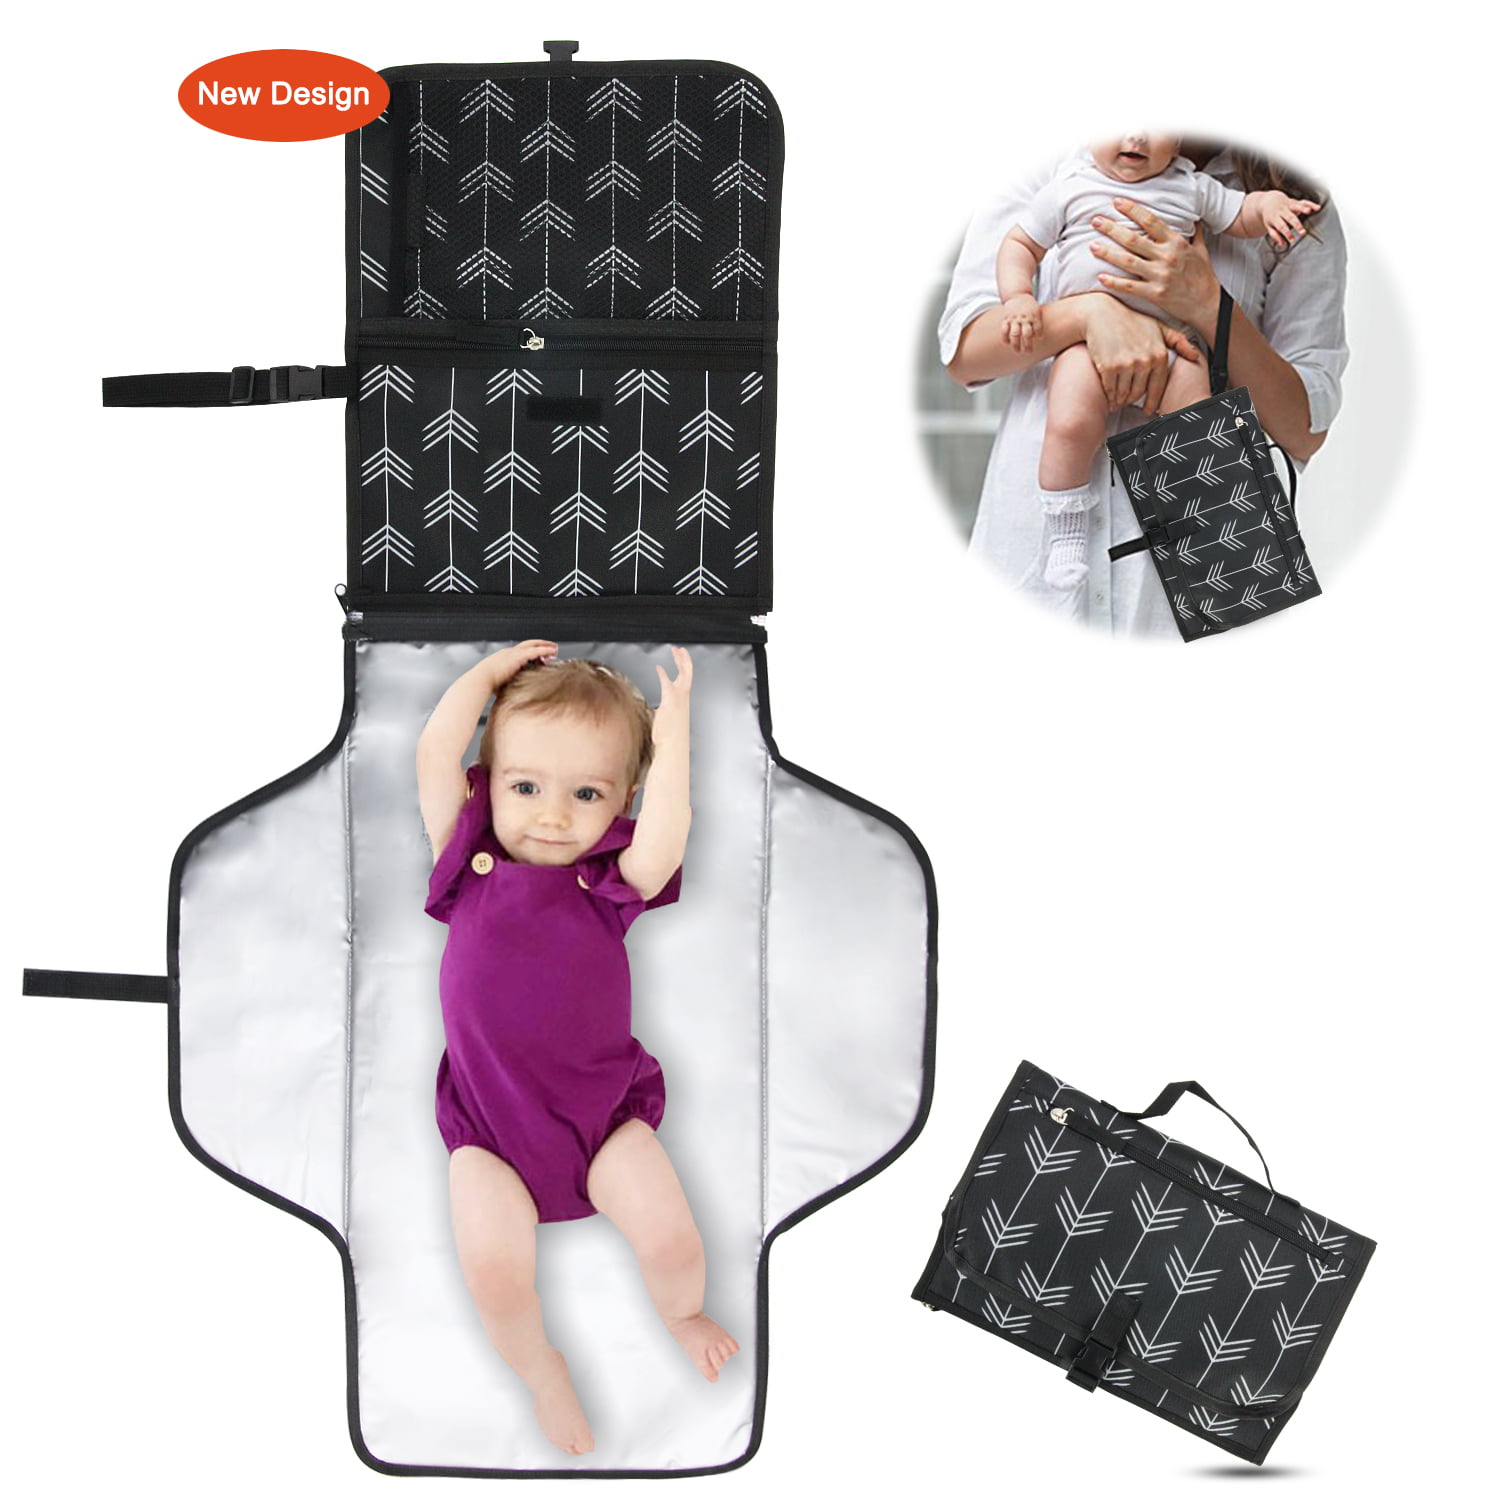 Lictin Portable Nappy Changing Mats Baby Travel Changing Mats with Head Cushion Back Seat Organizer with 8 Pockets Waterproof Foldable Nappy Mat